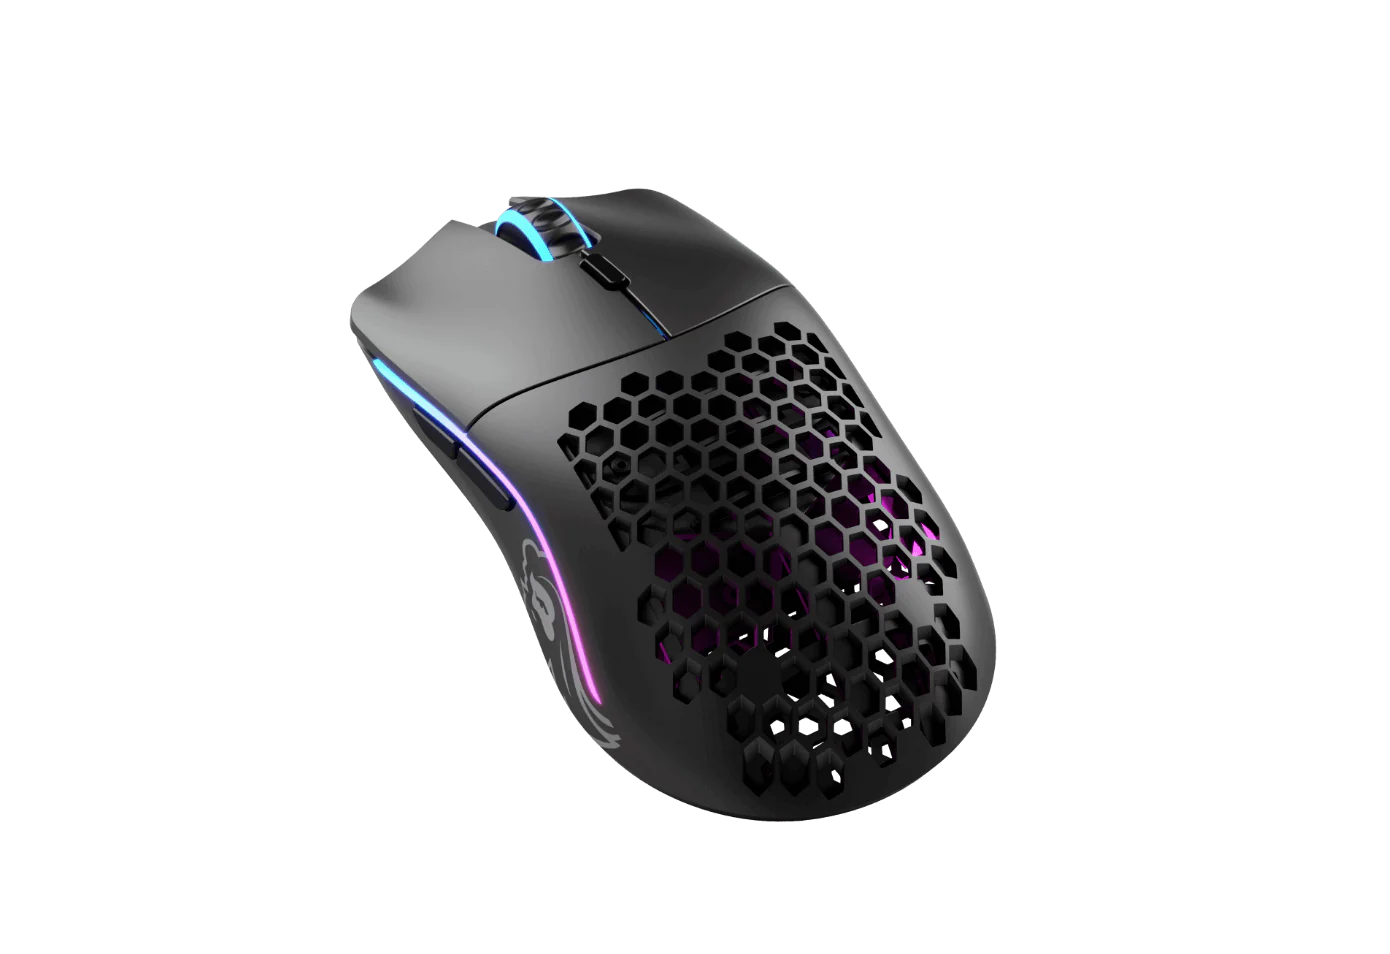 Glorious Model D-/O- RGB Wireless Gaming Mouse